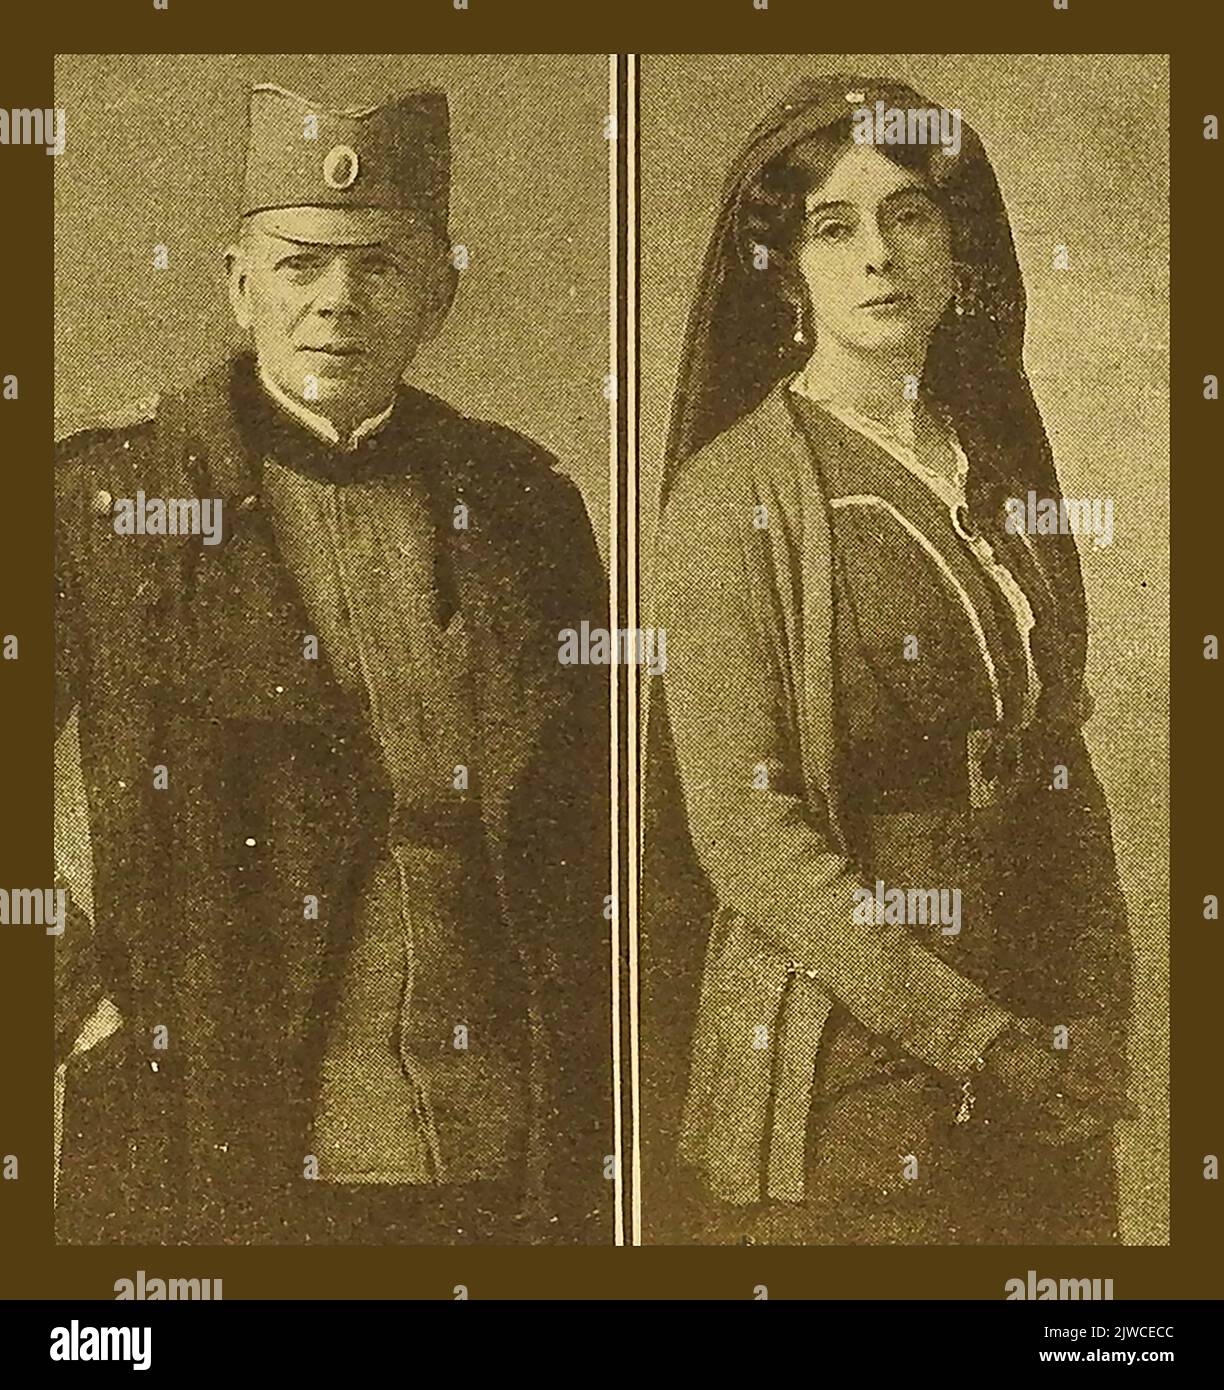 Old portraits of  Claude Askew (1865 – 1917) and his  wife Alice (1874 – 1917)  nee Leake, (both prolific authors). He went to Serbia with the first British field hospital in World War One and became  became an honorary  Major in the Serbian resistant forces. Previously they had both been involved with the Munro Ambulance Corps at Furnes in Belgium.  --- Stari portreti Kloda Askeua (1865 – 1917) i njegove supruge Alise (1874 – 1917) Nee Leake, (oba plodna autora). Otišao je u Srbiju sa prvom britanskom terenskom bolnicom u Prvom svetskom ratu. Stock Photo